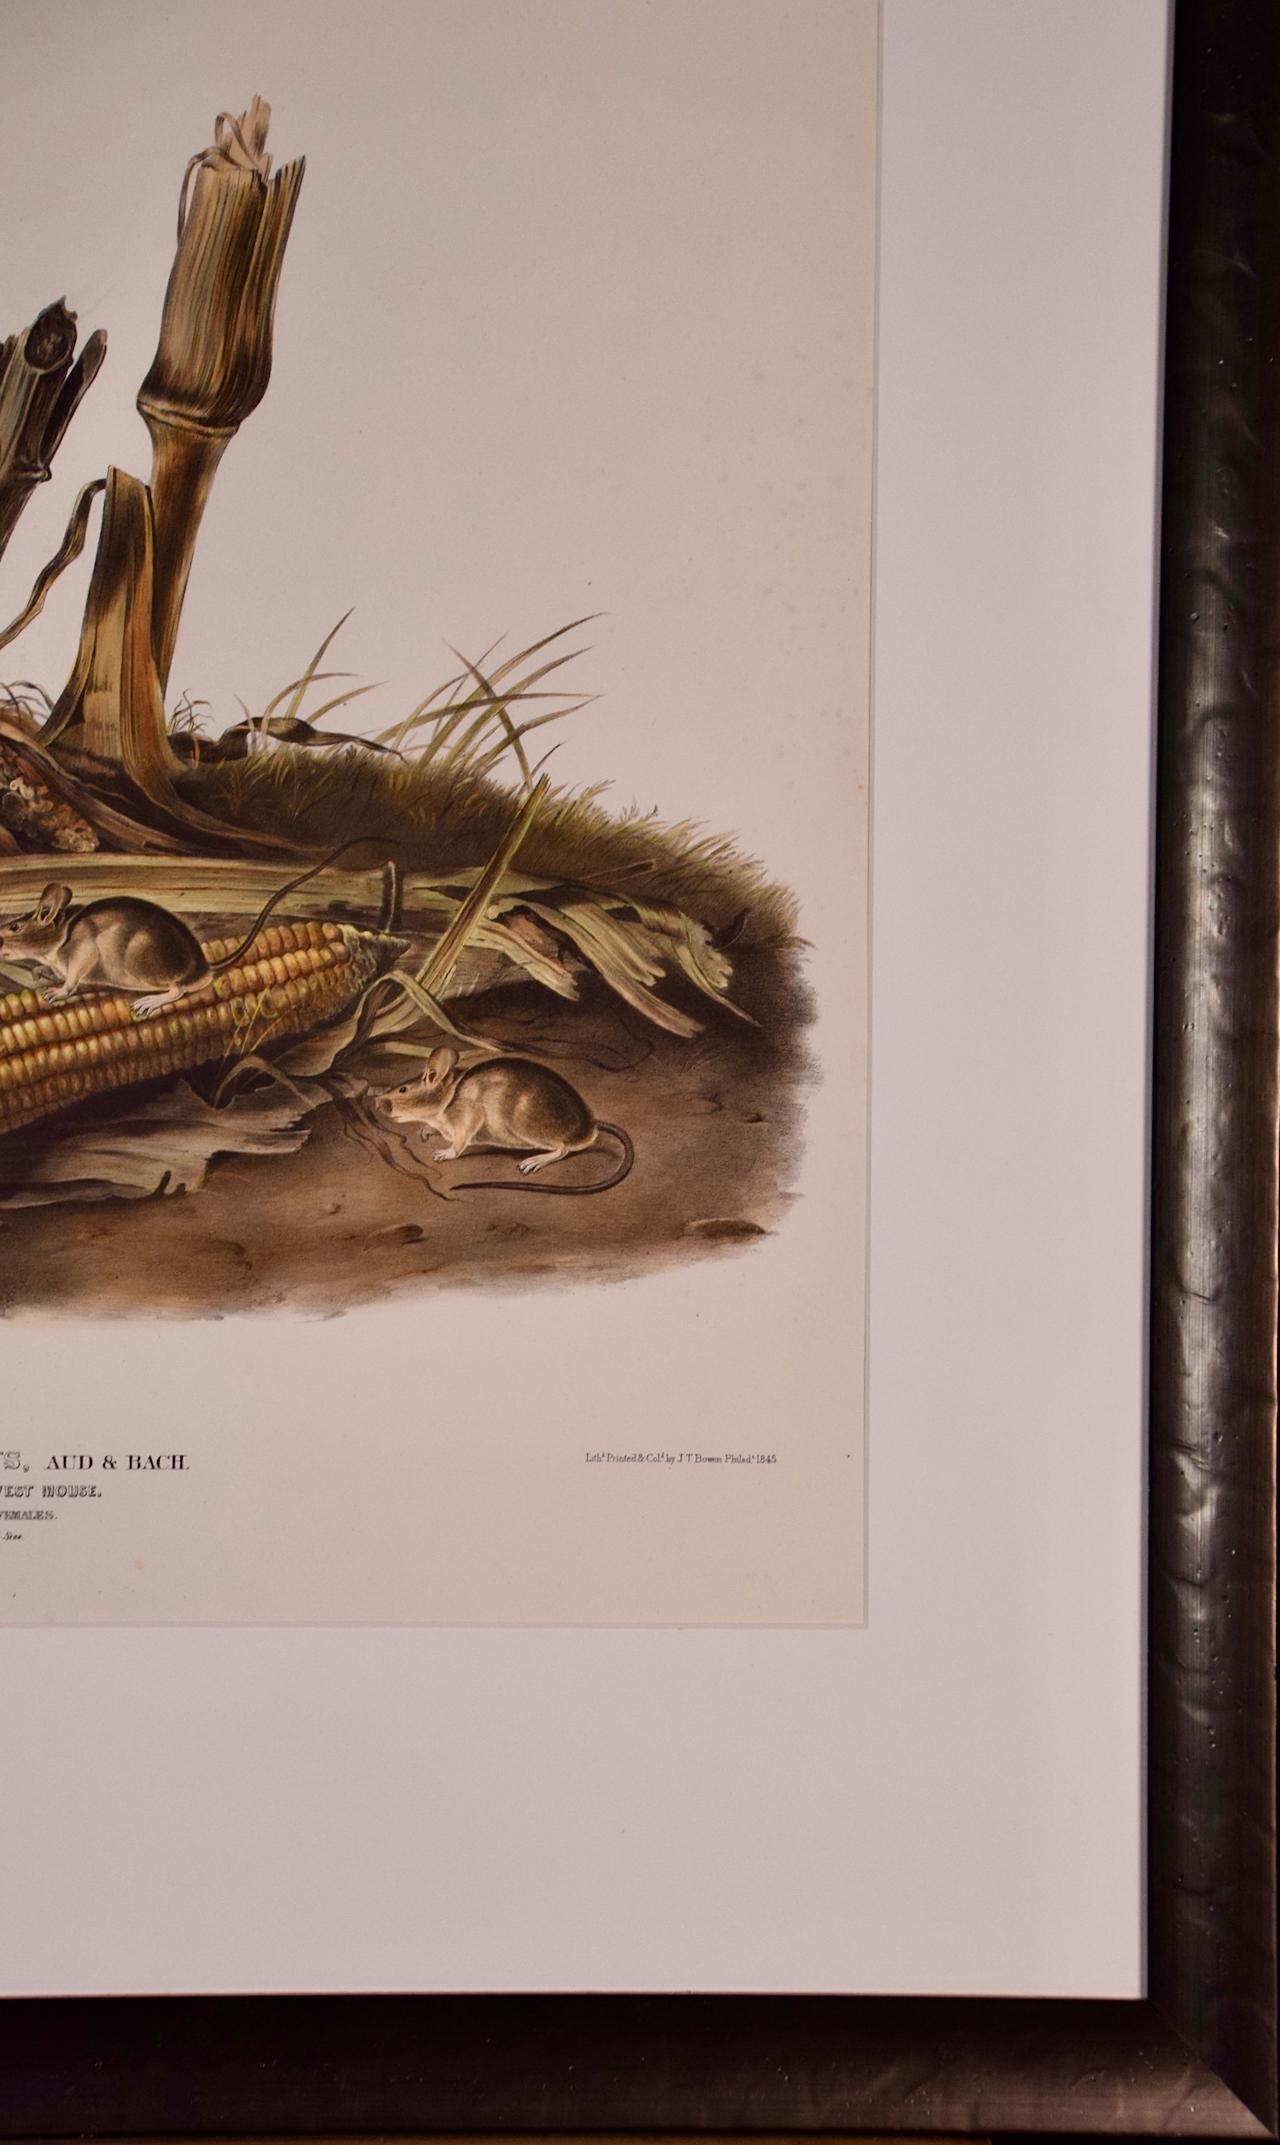 This rare original first edition Audubon hand-colored imperial folio-sized lithograph entitled 